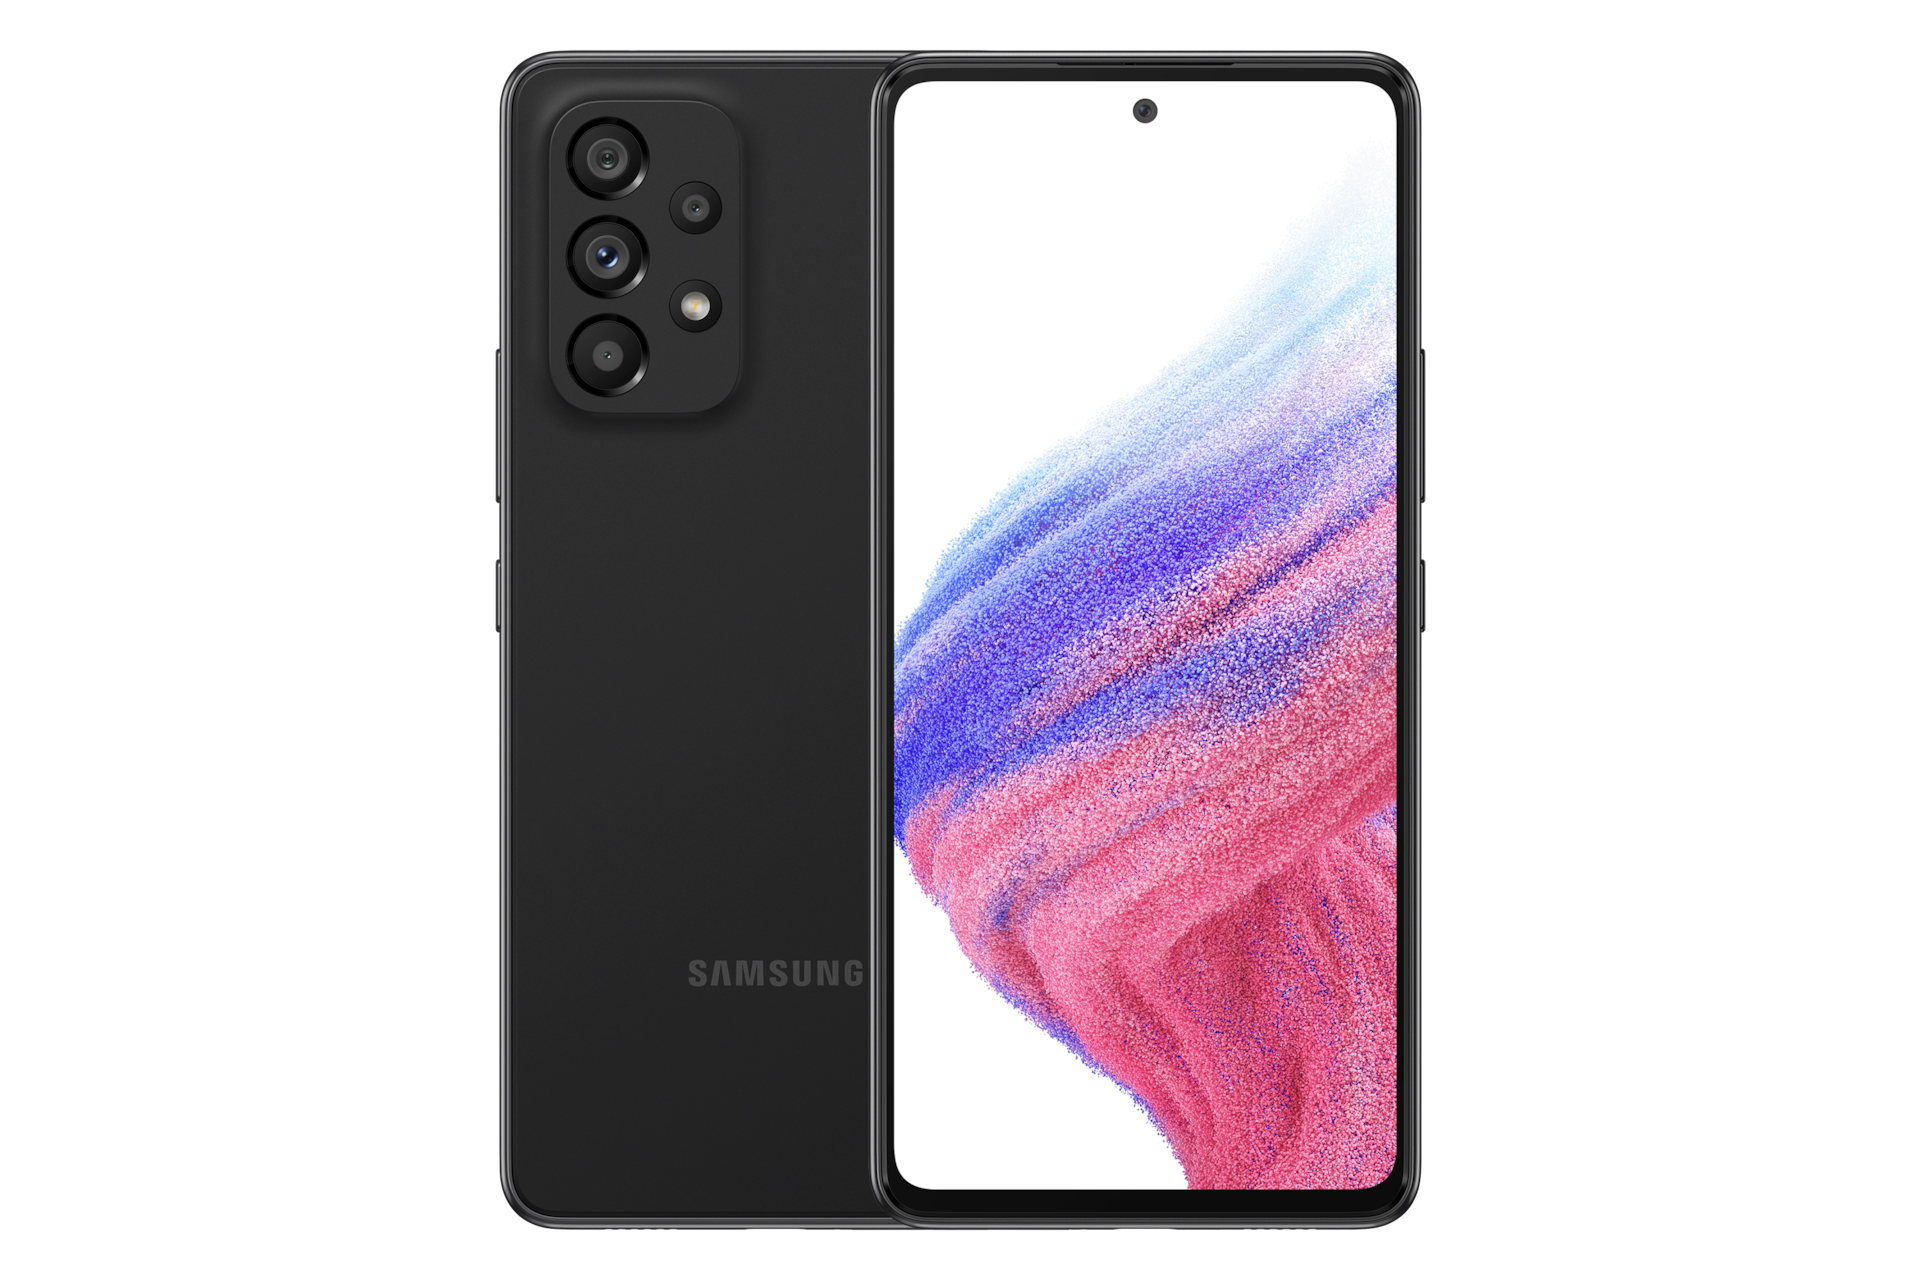 Galaxy A53 5G in Awesome Black seen from the front with a colorful wallpaper onscreen. It spins slowly, showing the display, then the smooth rounded side of the phone with the SIM tray, then the matte finish and the minimal camera housing on the rear and comes to a stop at the front view again.